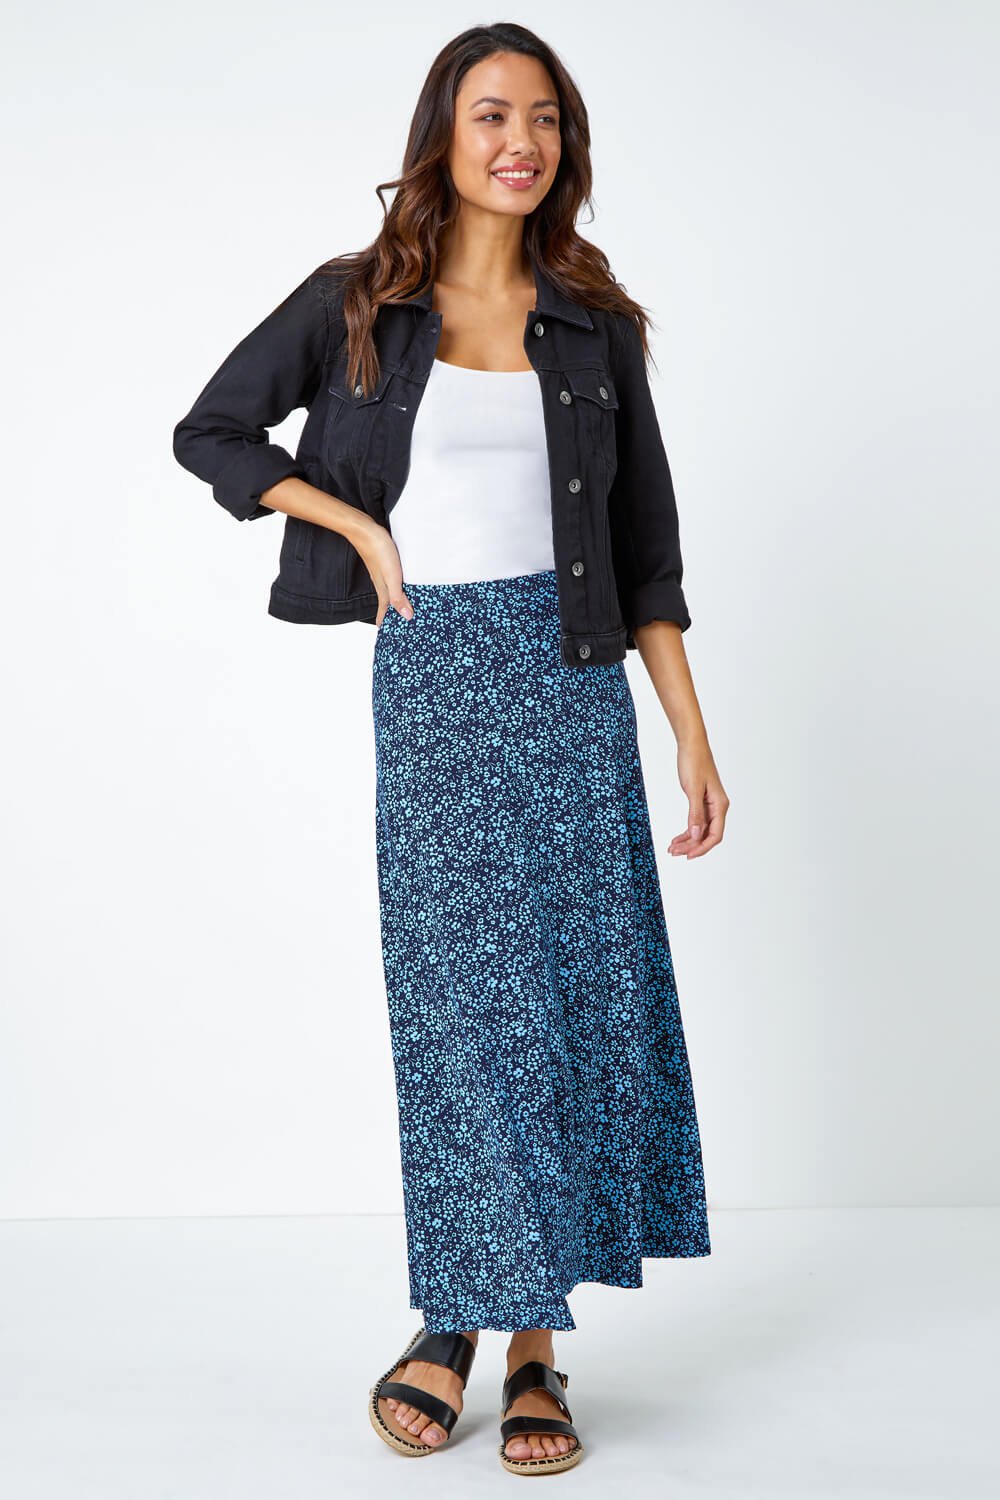 Blue Ditsy Floral Stretch Midi Skirt, Image 2 of 5